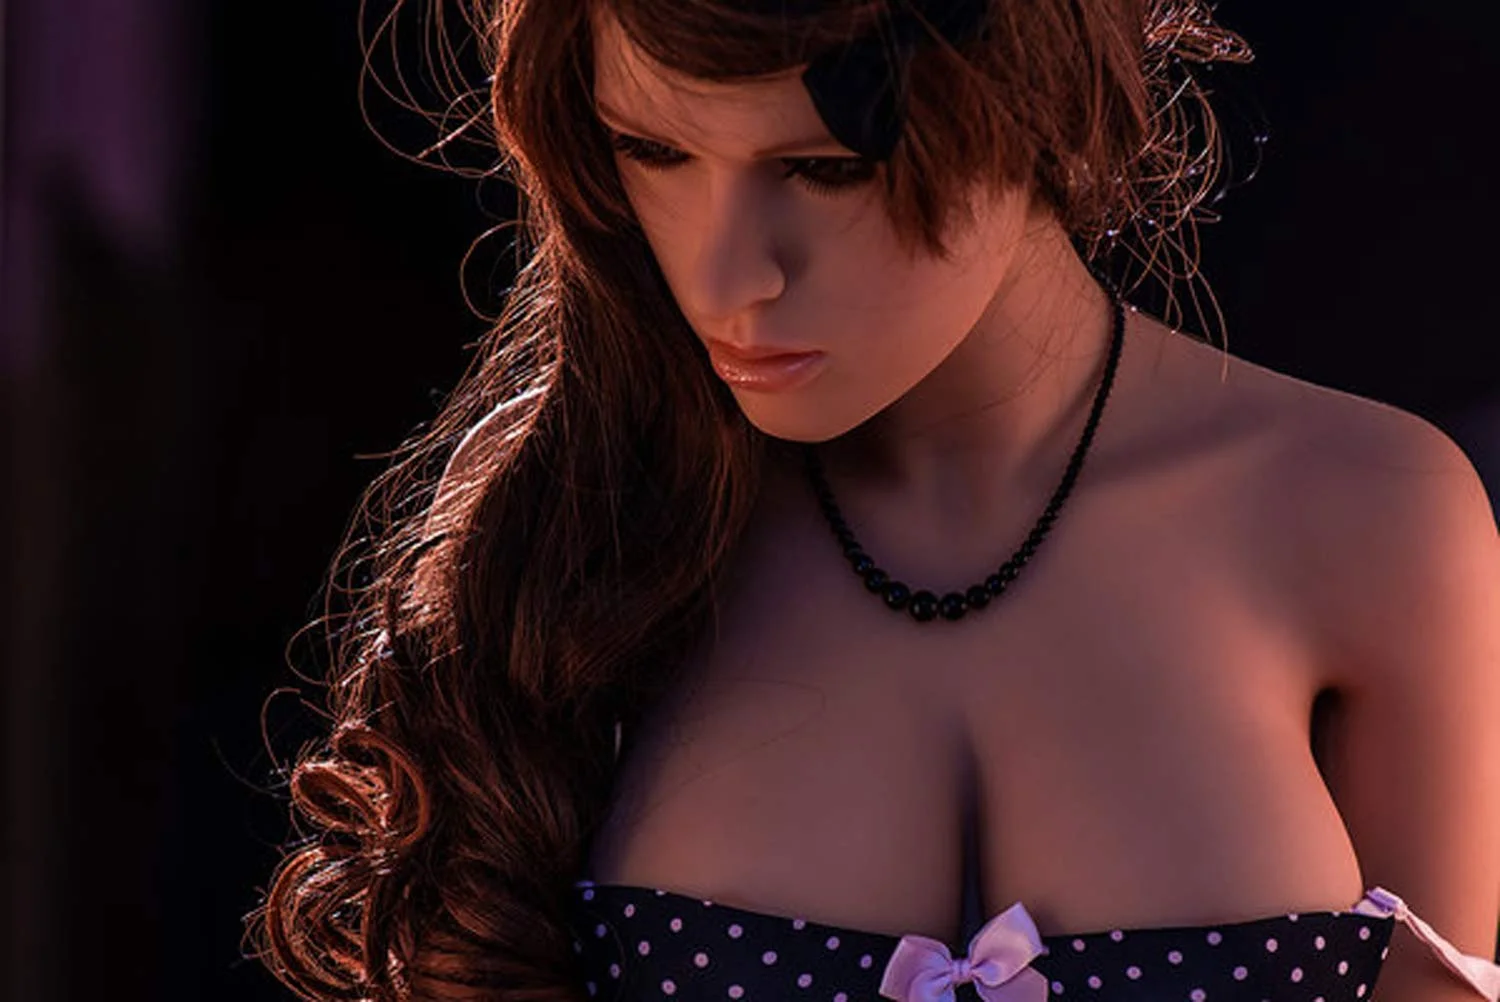 Sex doll with black necklace